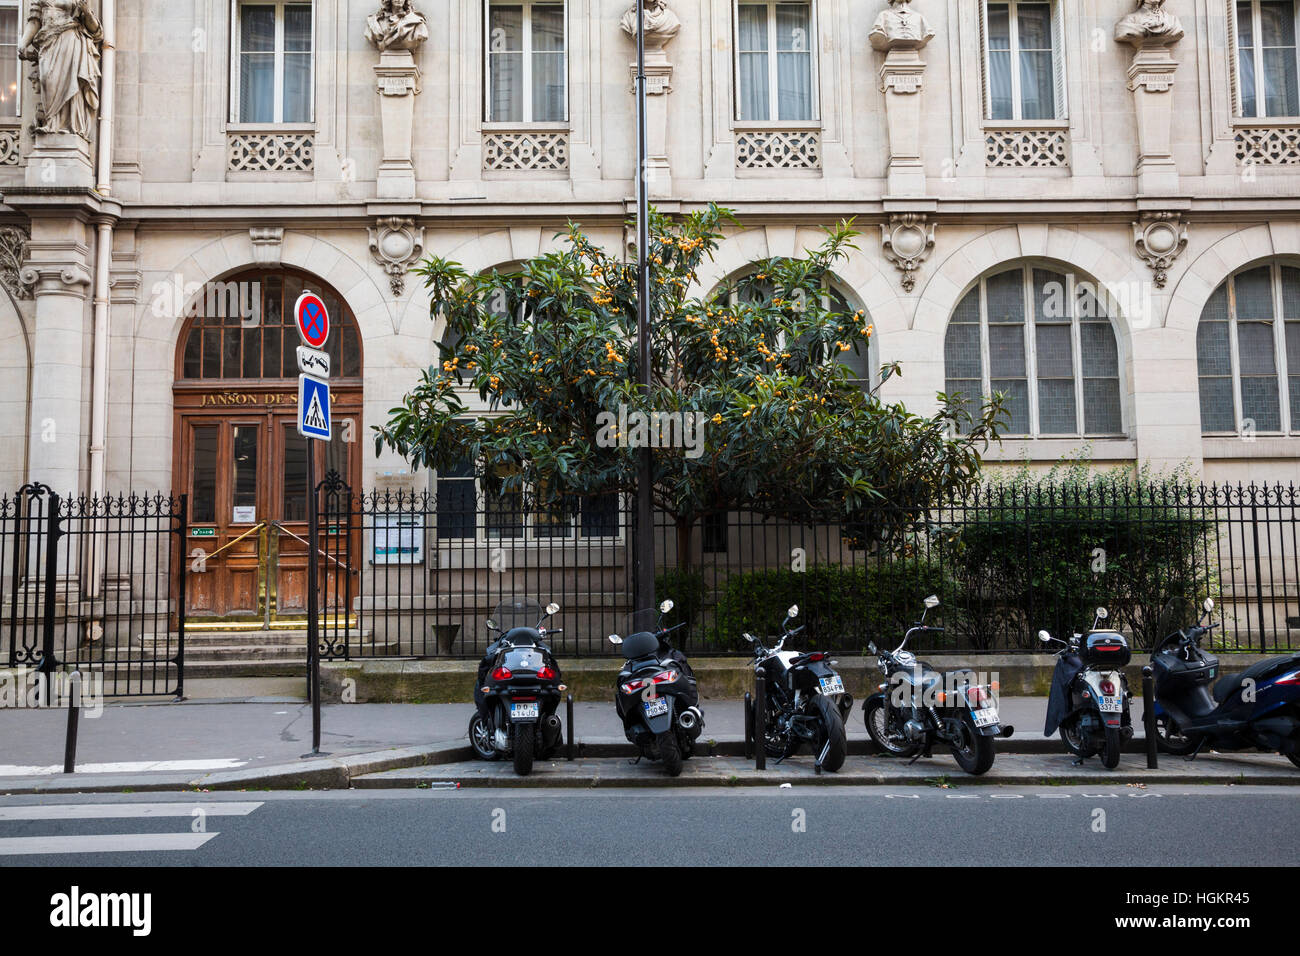 Fruiting loquat tree (Eriobotrya japonica) at the entrance to Lycée Janson de Sally, Paris, France. Stock Photo